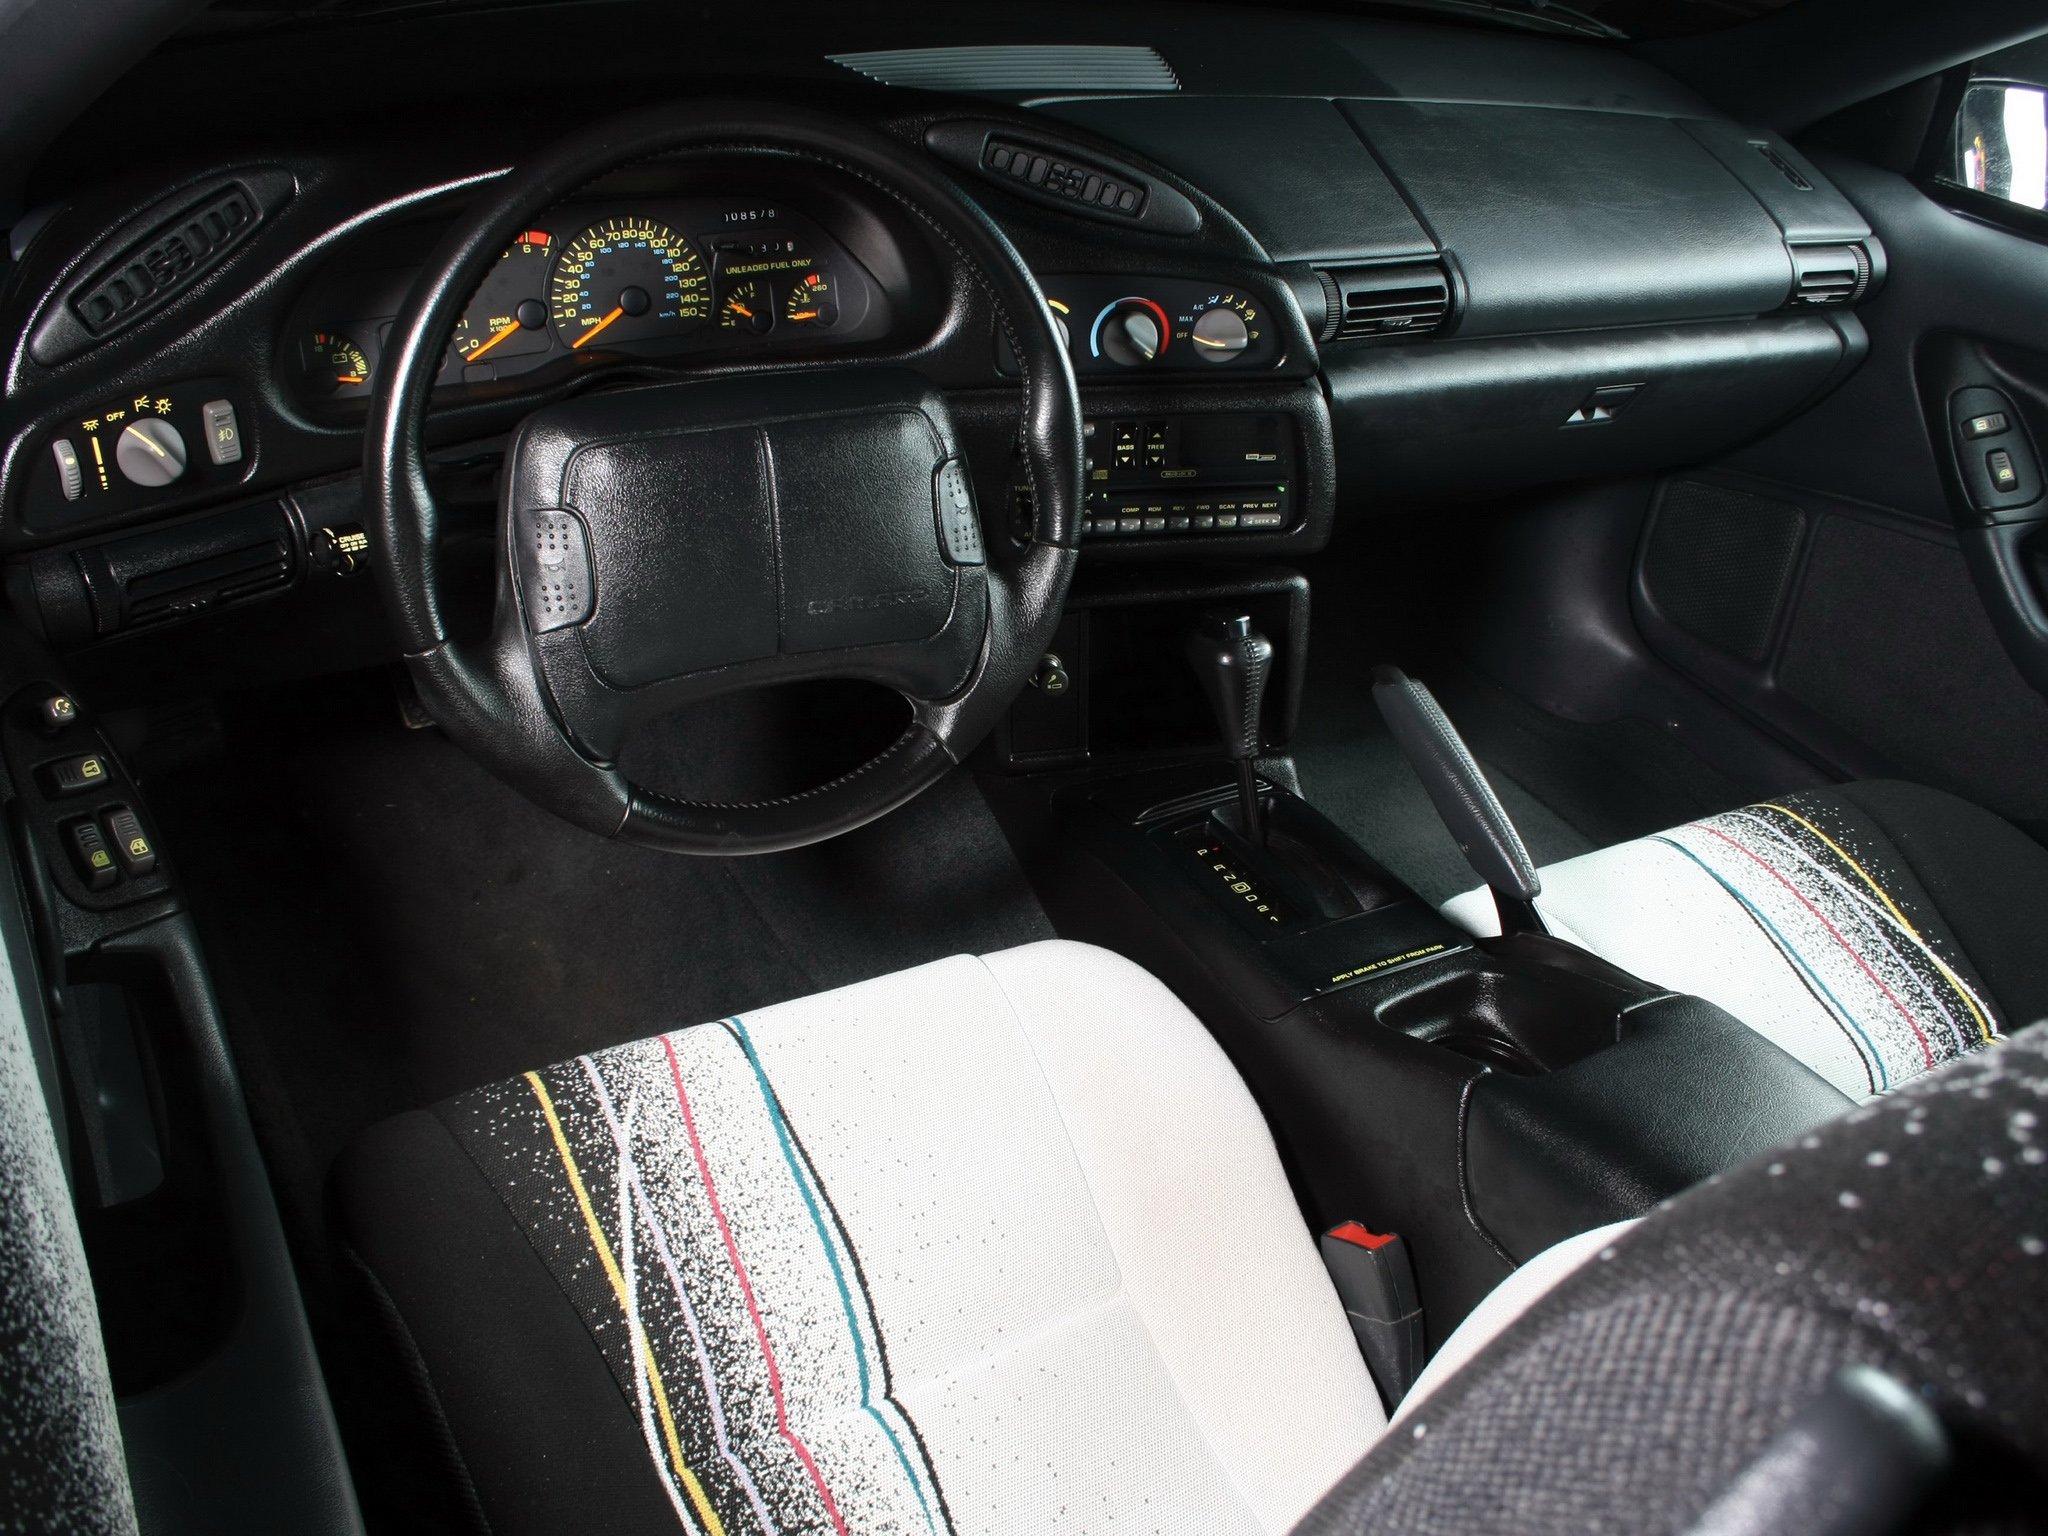 1993 chevrolet camaro z28 indy 500 pace muscle race racing interior wallpapers hd desktop and mobile backgrounds 1993 chevrolet camaro z28 indy 500